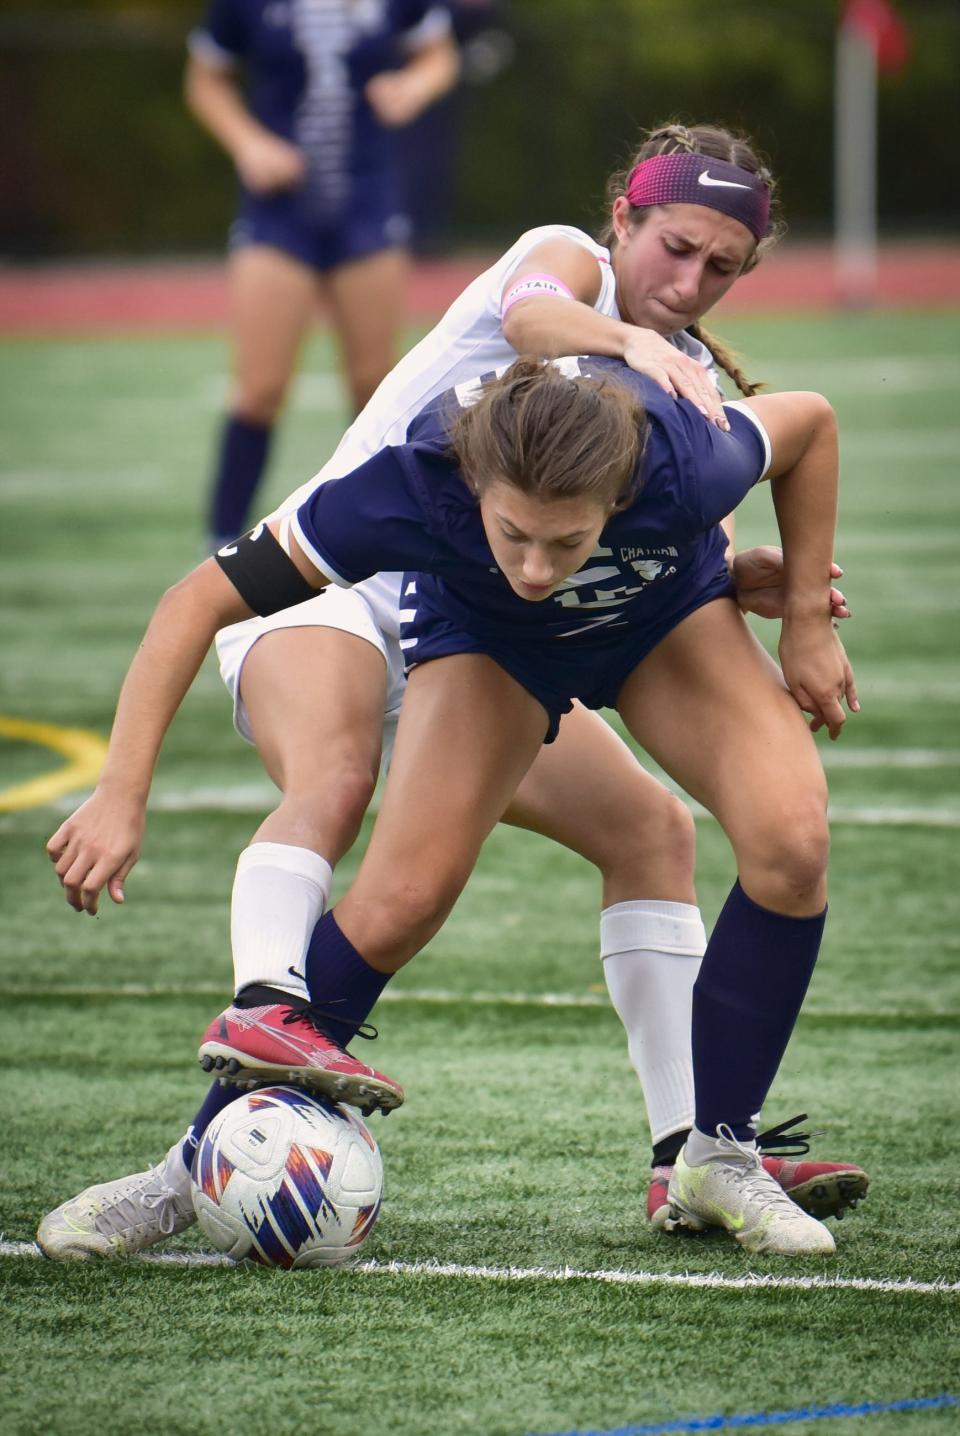 Paige Droner, #10 of Chatham controls the ball as Olivia Russomanno, # 11 of Cranford tries to steal from the behind in the second half during the NJSIAA North 2, Group 3 Girls Soccer Semifinal at Cougar Field in Chatham, Tuesday 11/01/22.